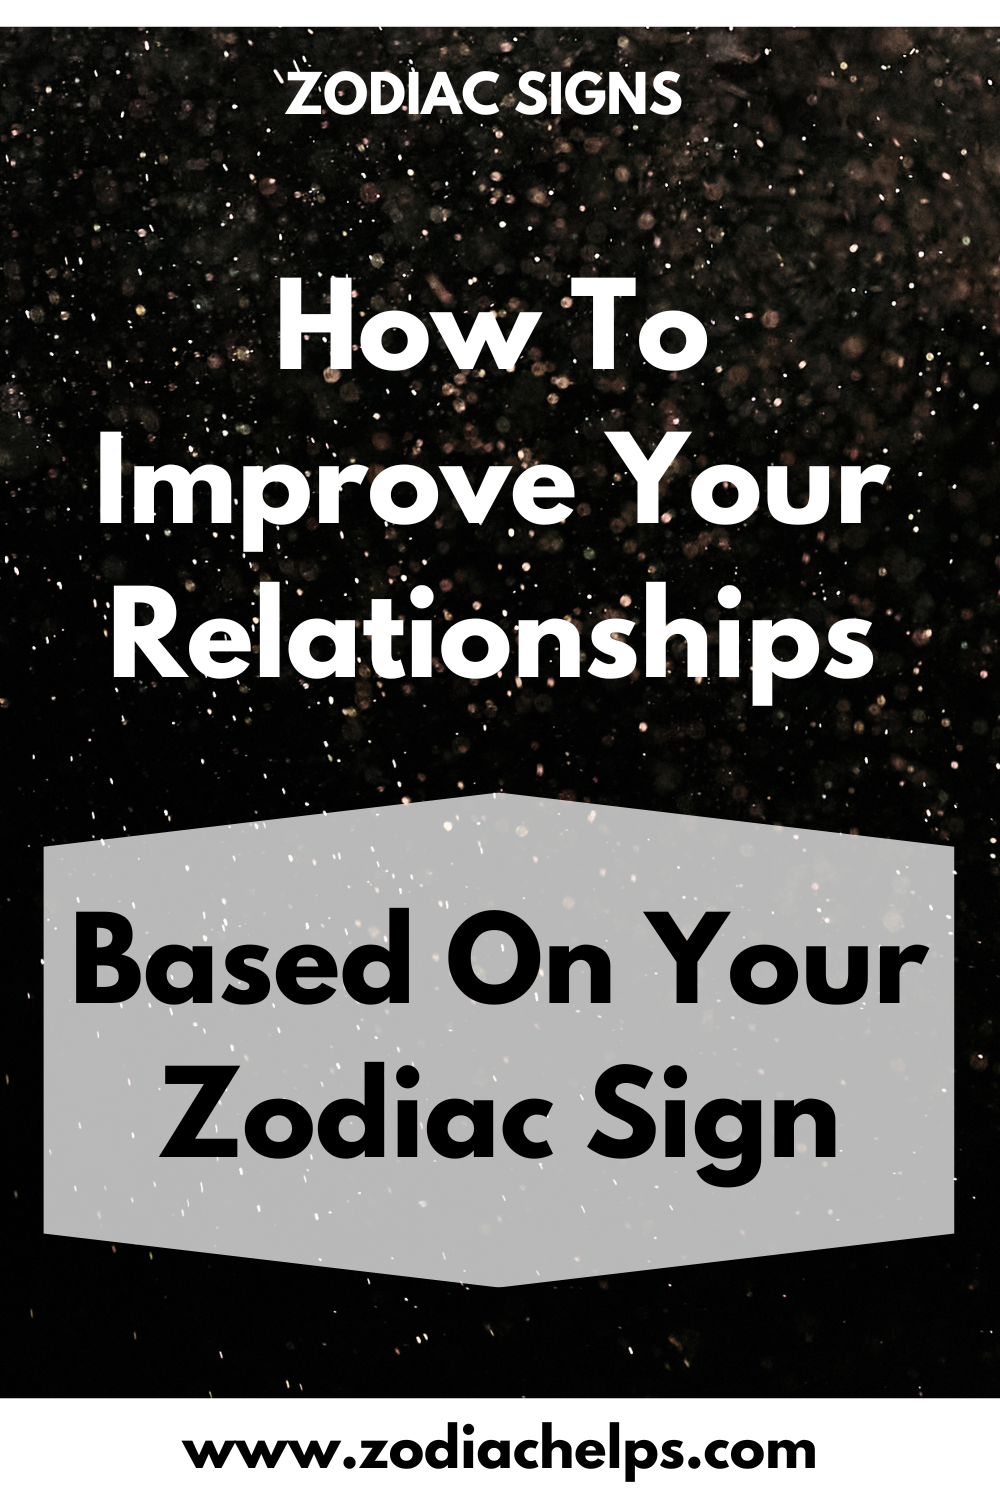 How To Improve Your Relationships, Based On Your Zodiac Sig